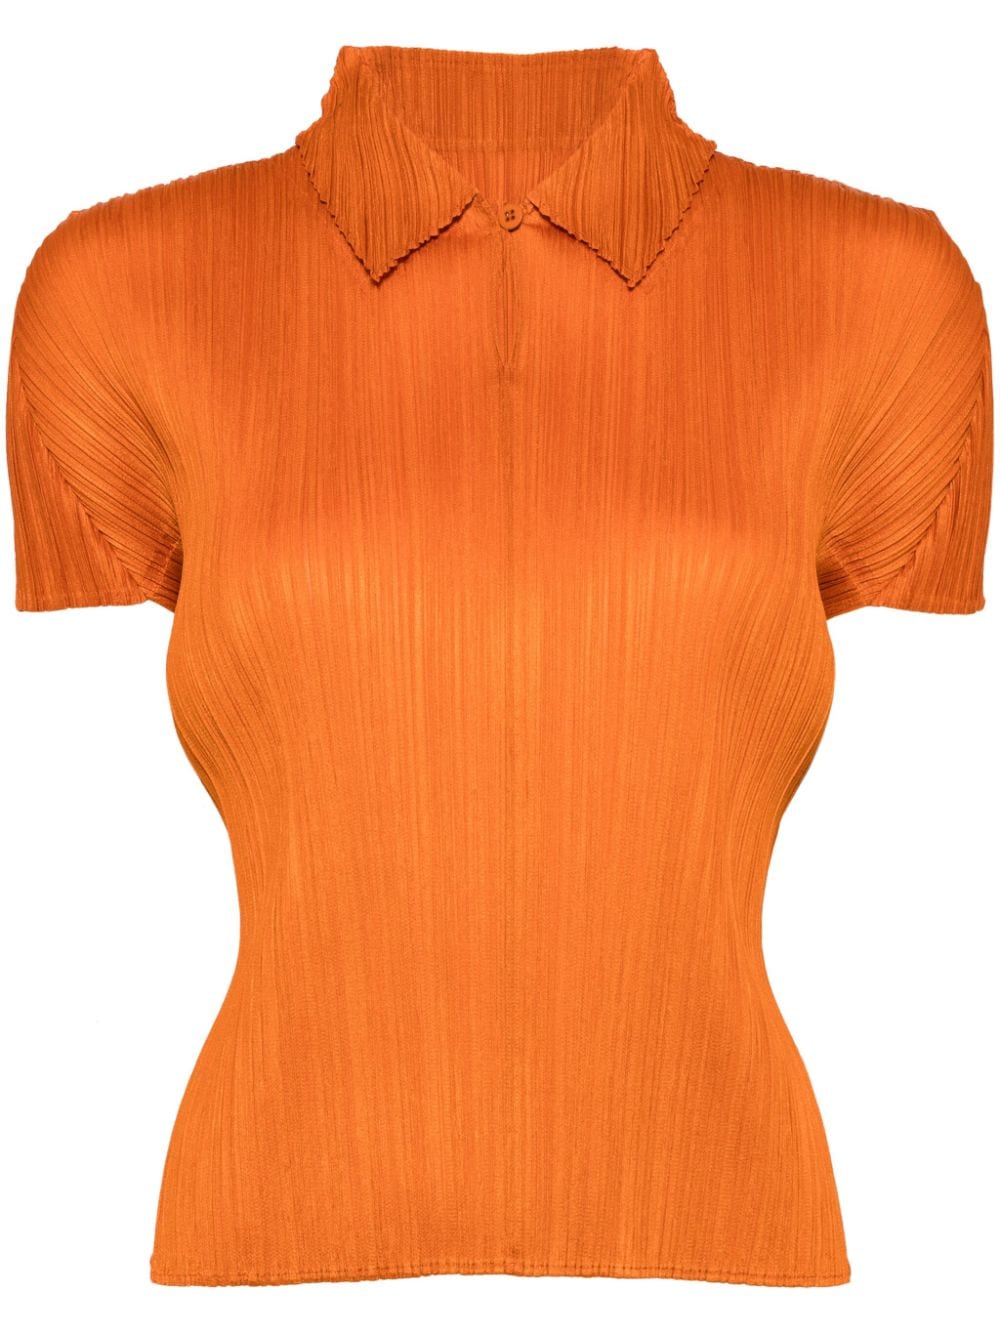 Pleats Please Issey Miyake Monthly Colors April top - Orange von Pleats Please Issey Miyake